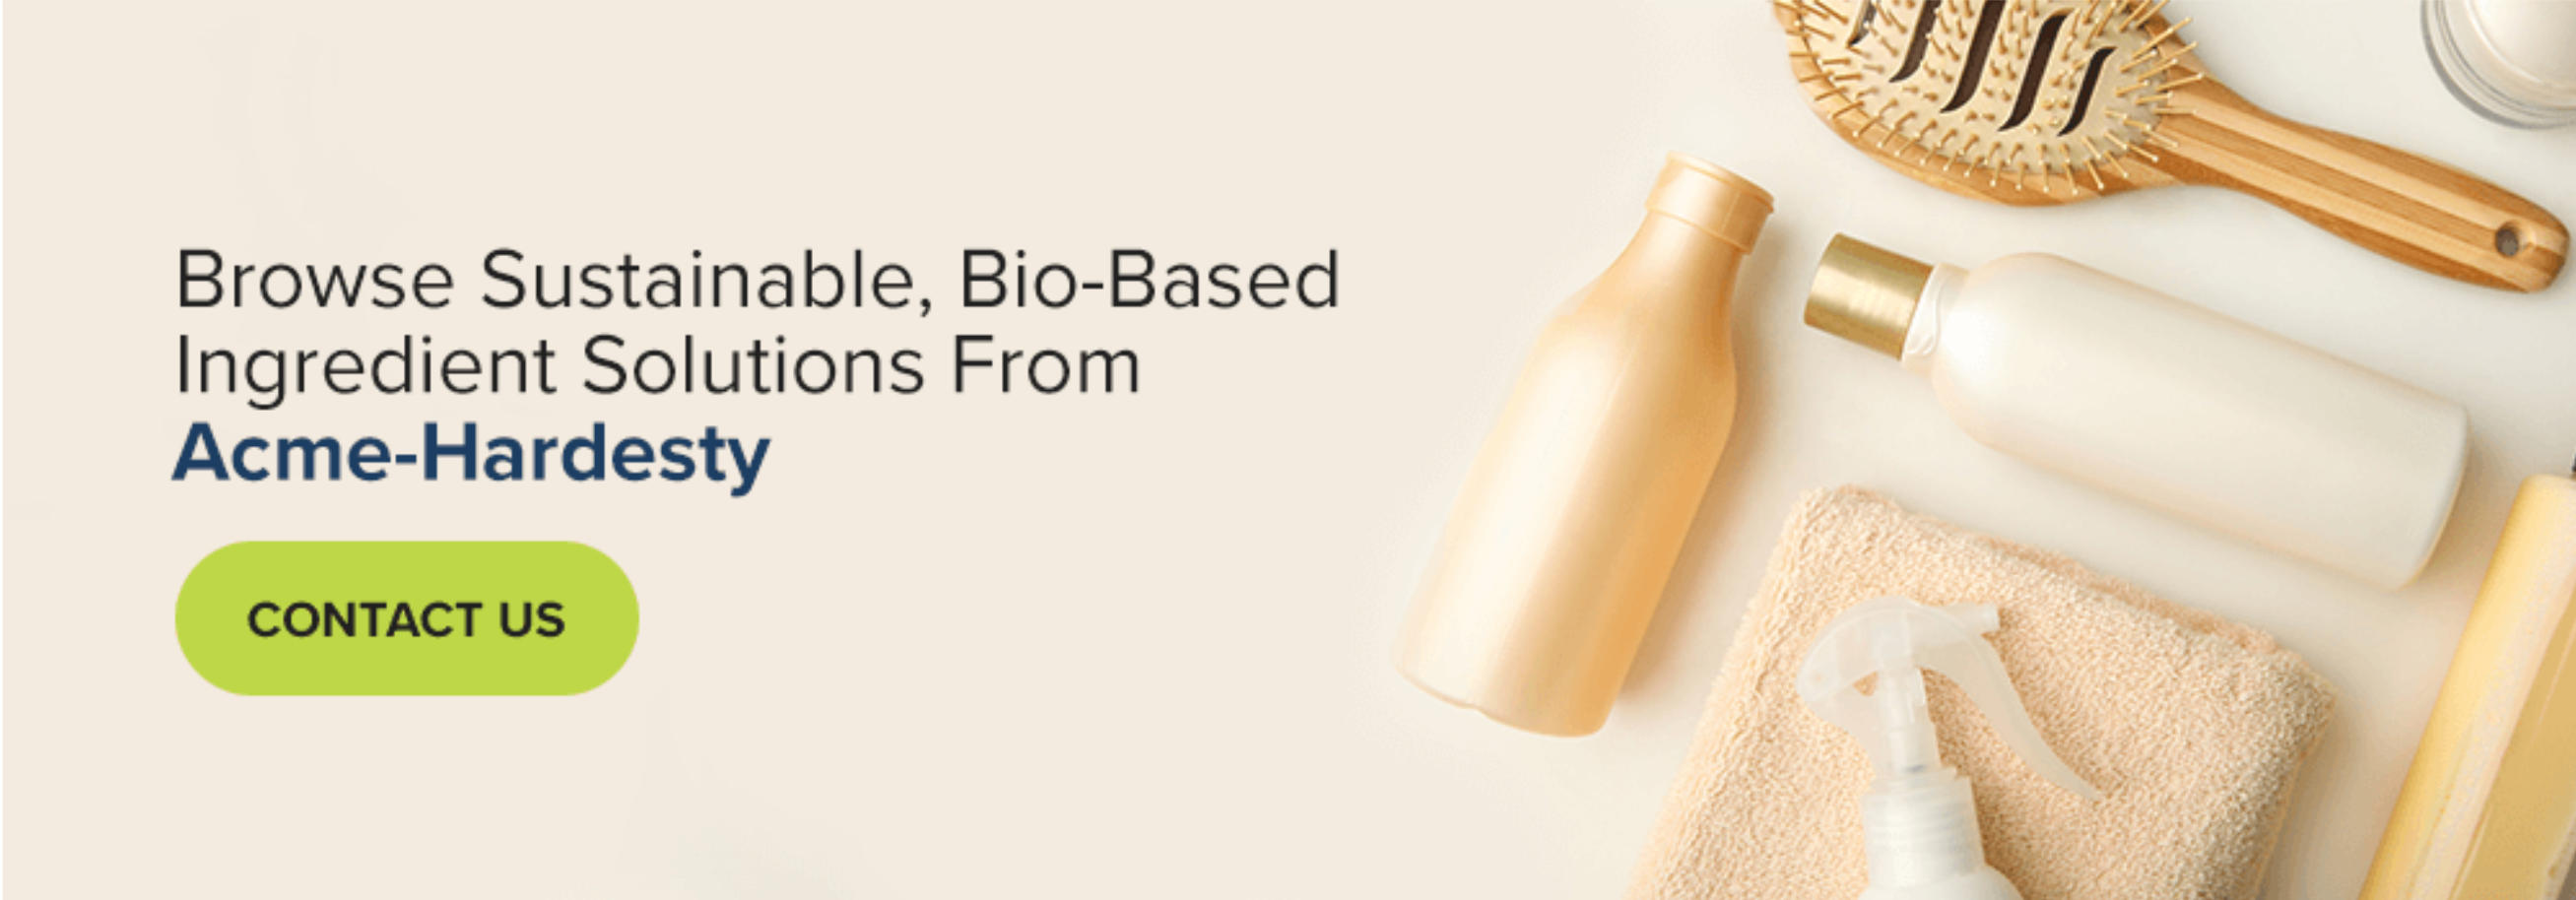 Browse Sustainable, Bio-Based Ingredient Solutions From Acme-Hardesty